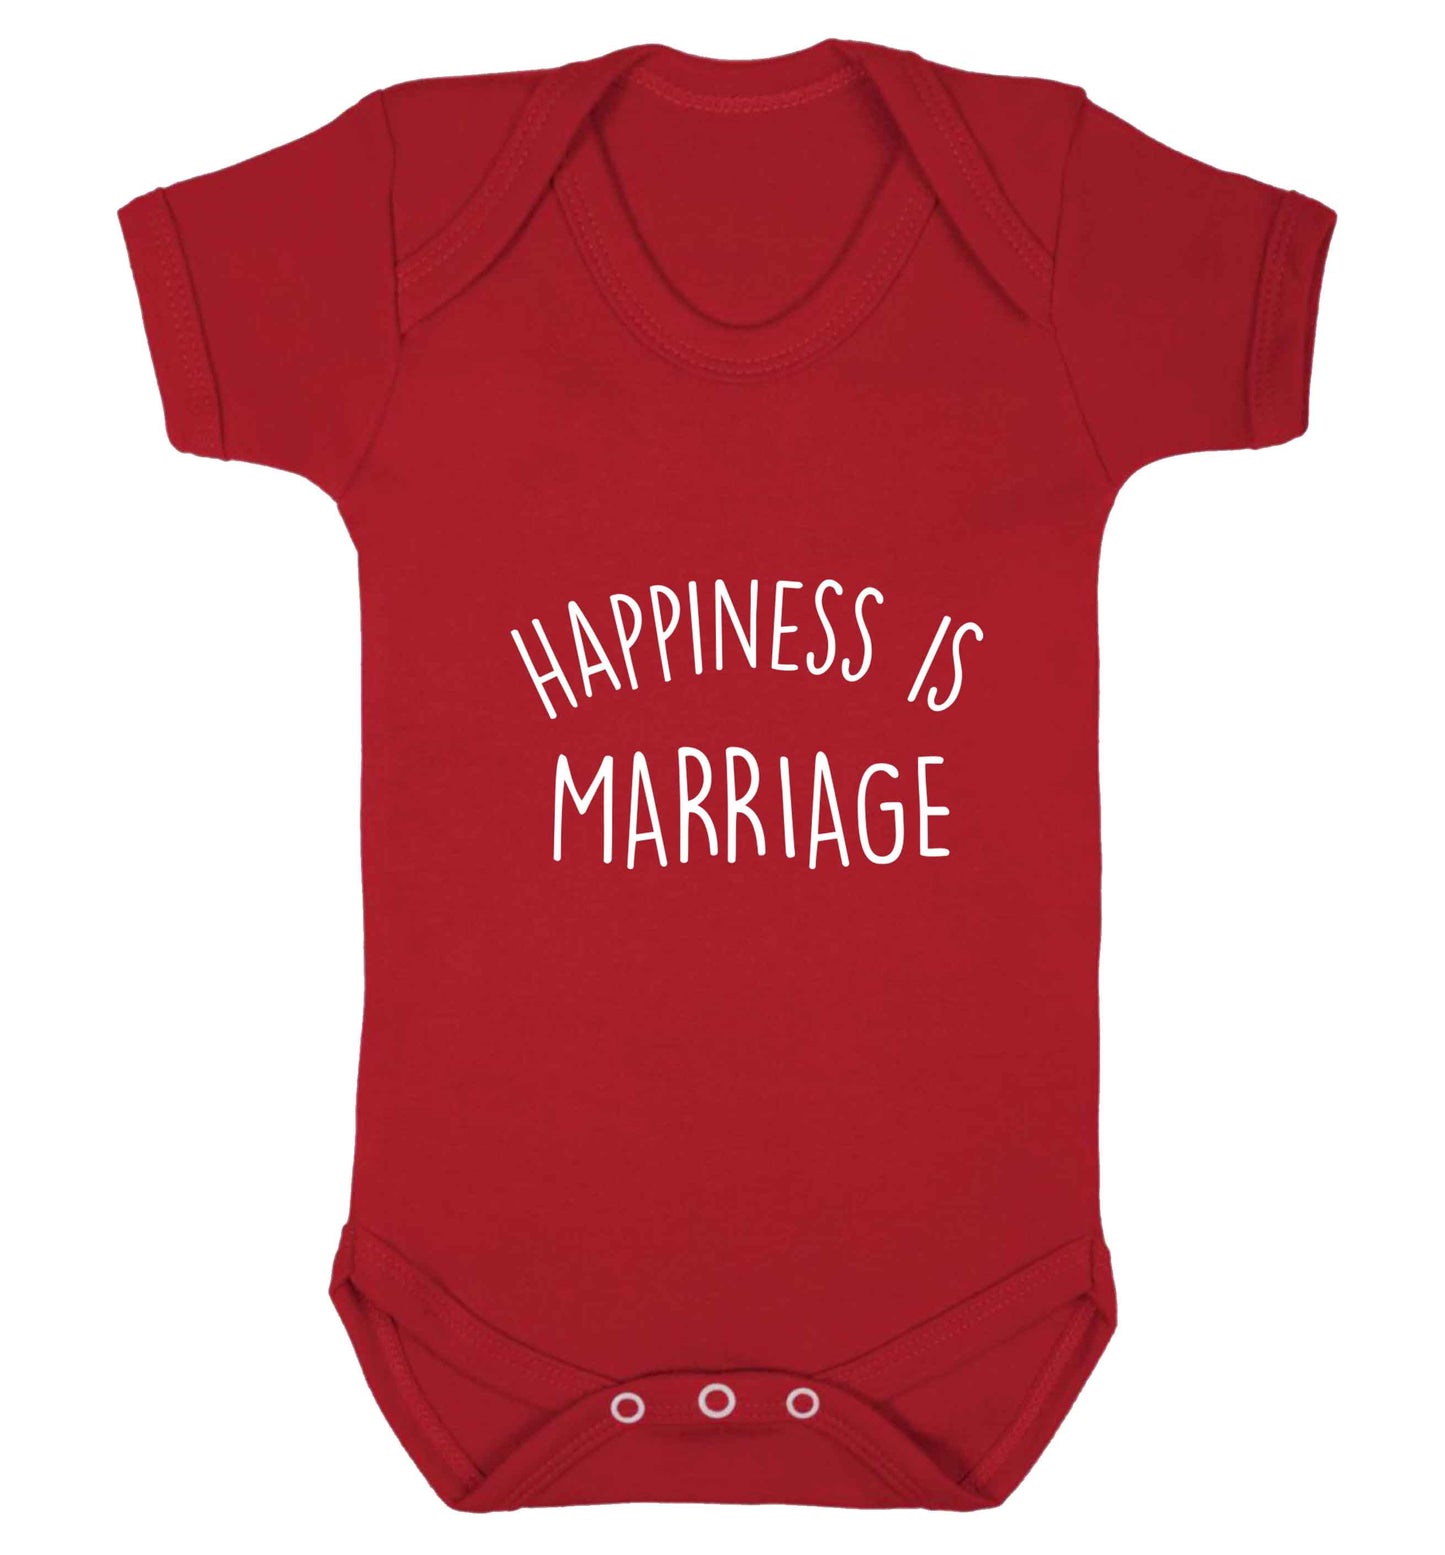 Happiness is wedding planning baby vest red 18-24 months